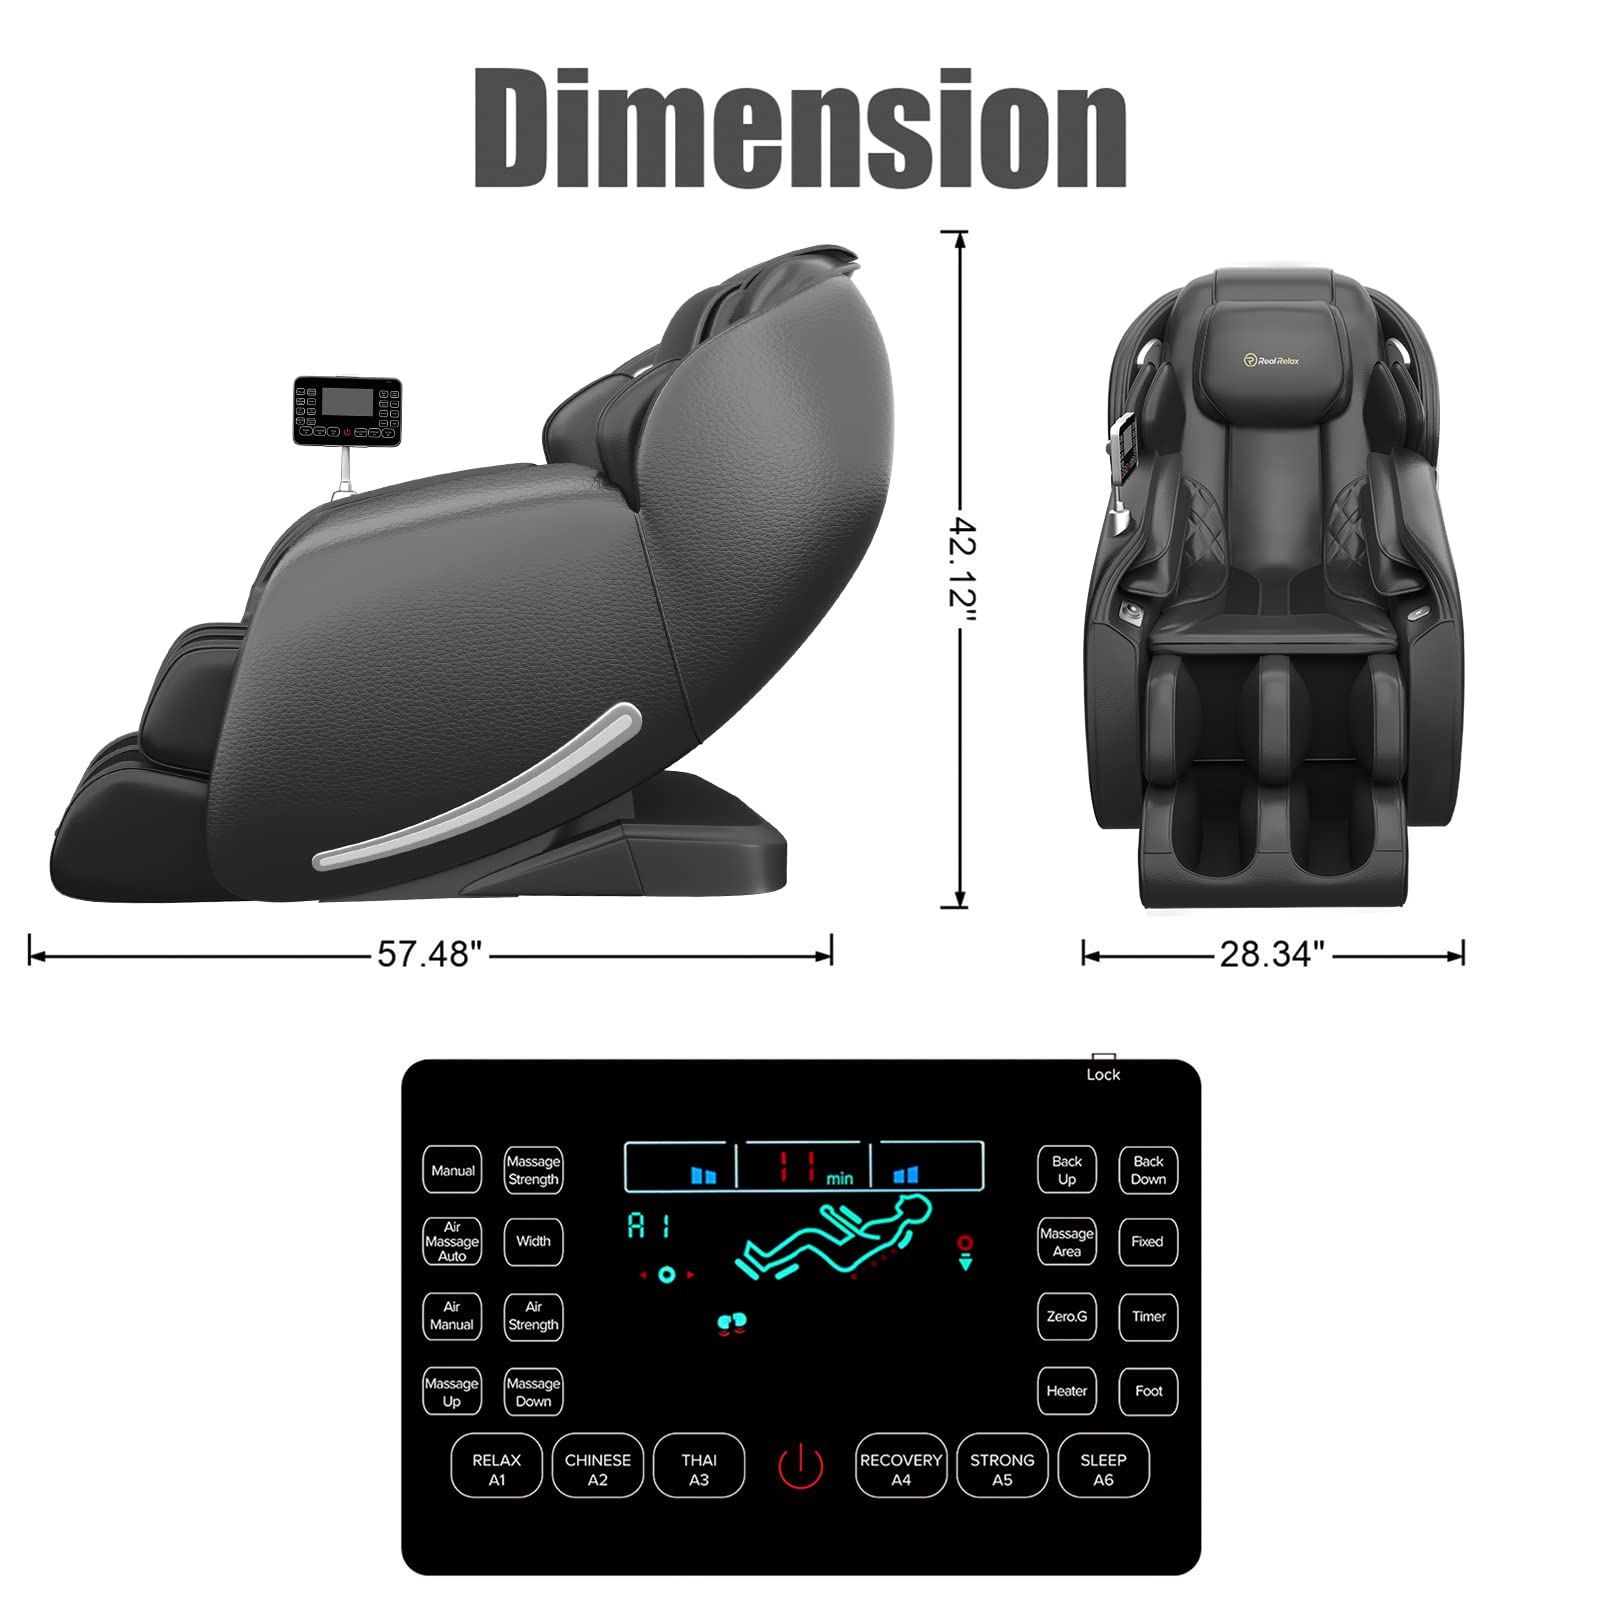 Real Relax notShow Favor-06 Massage Chair Black A